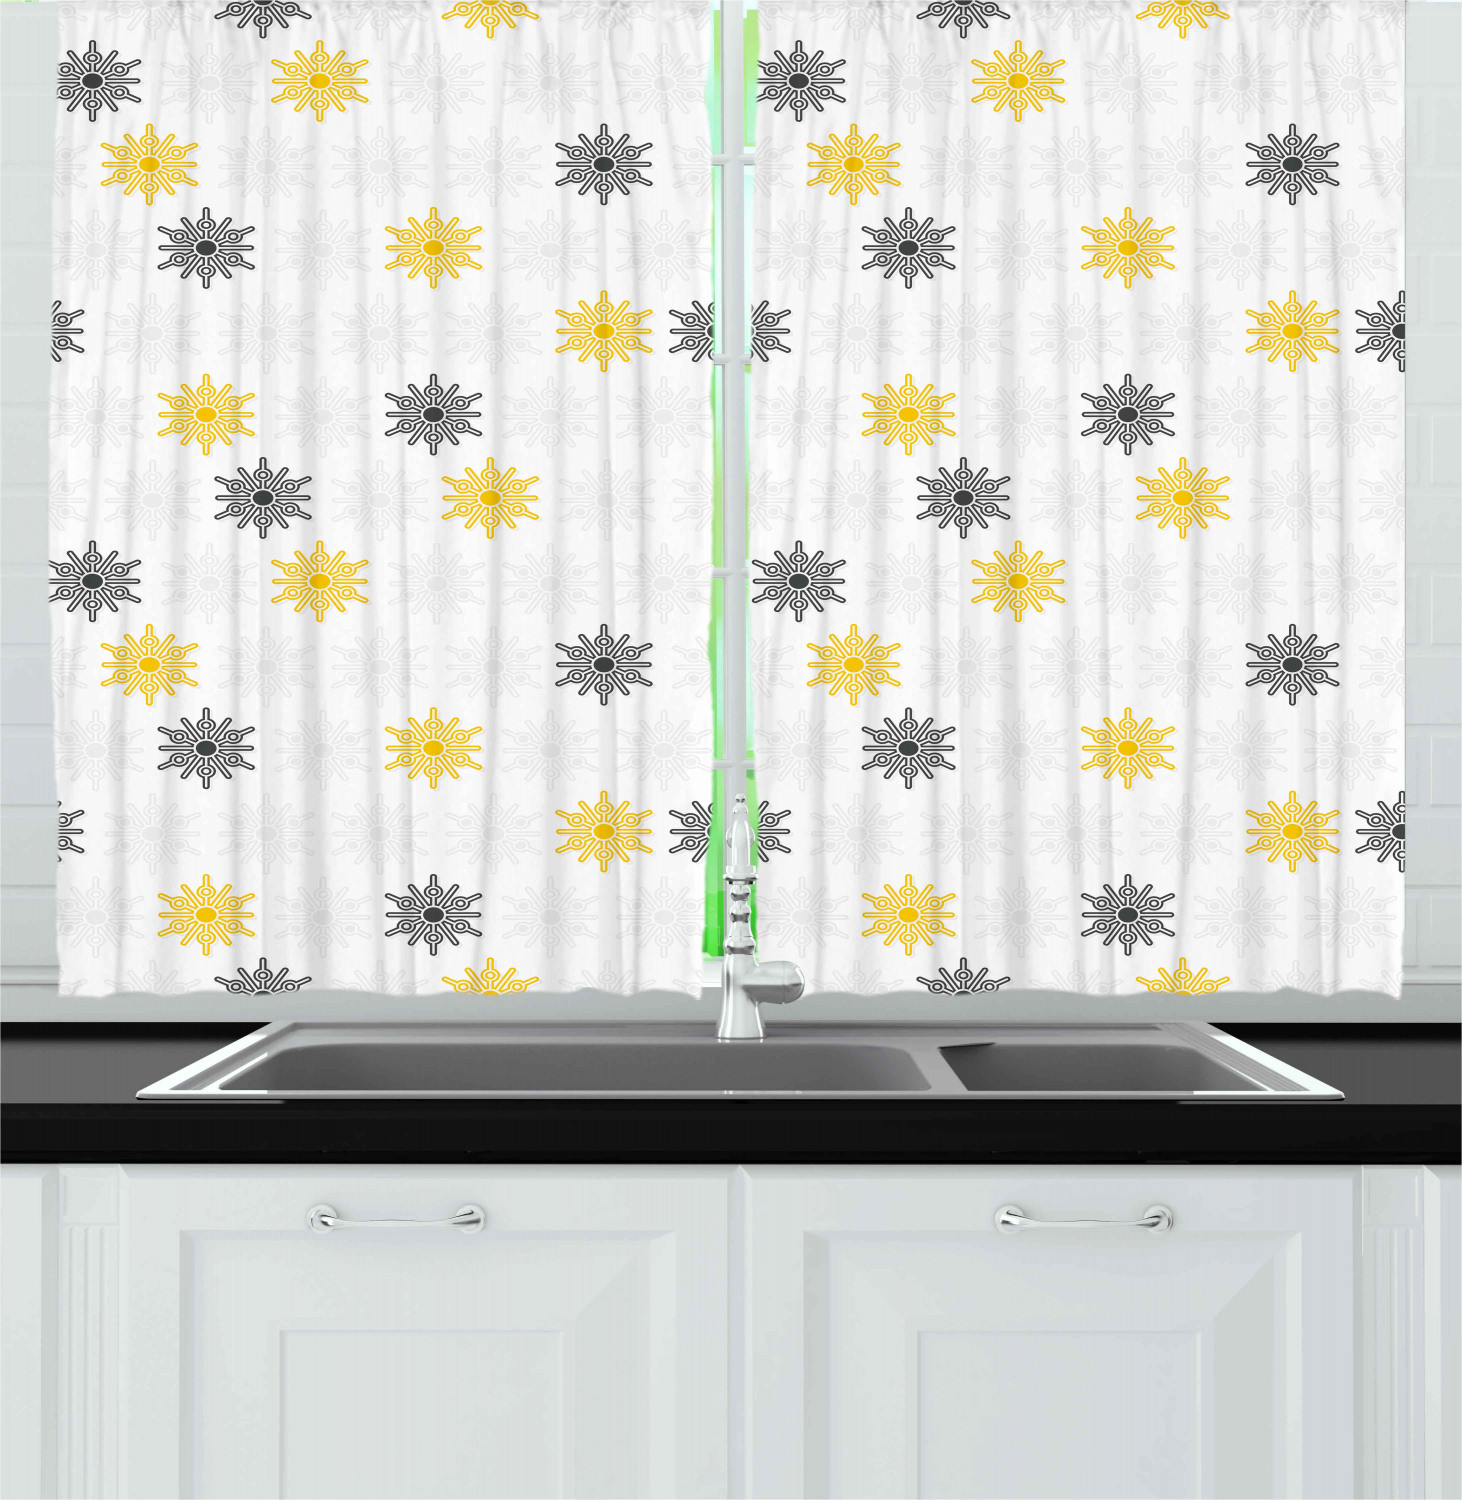 Yellow And Gray Kitchen Curtains
 Grey and Yellow Kitchen Curtains 2 Panel Set Window Drapes